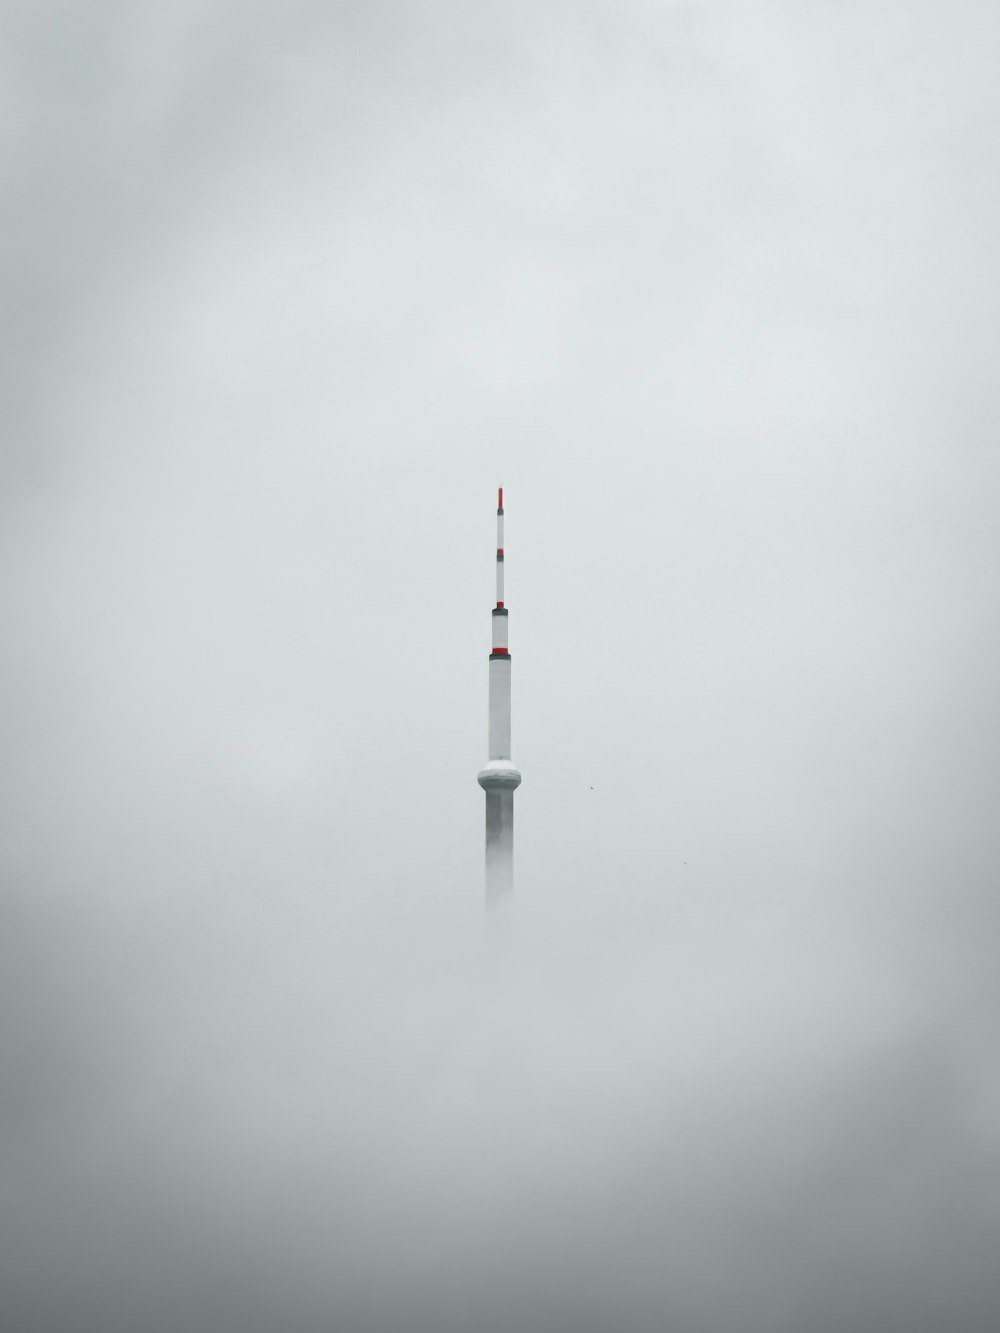 a very tall tower in the middle of a foggy sky